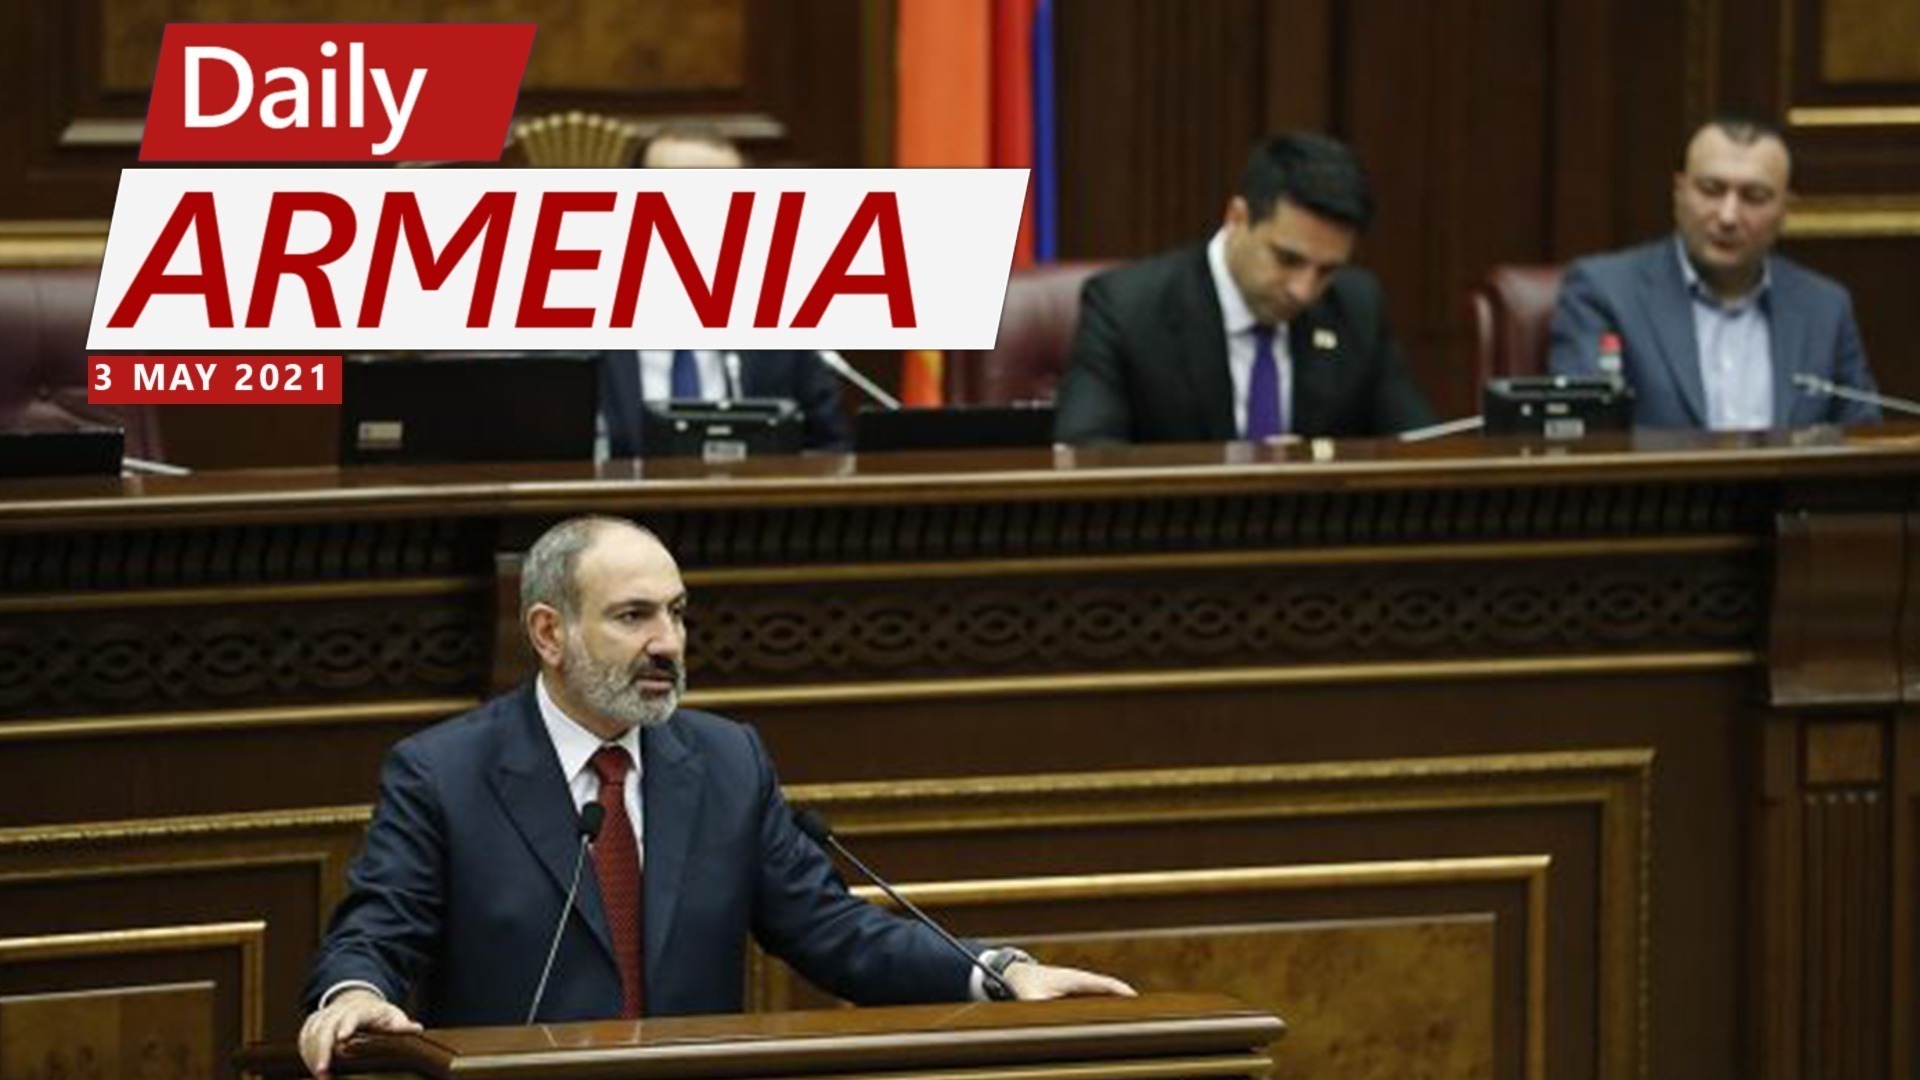 Parliament Votes Down Acting PM Pashinyan’s Candidacy, Moving Armenia Towards Elections